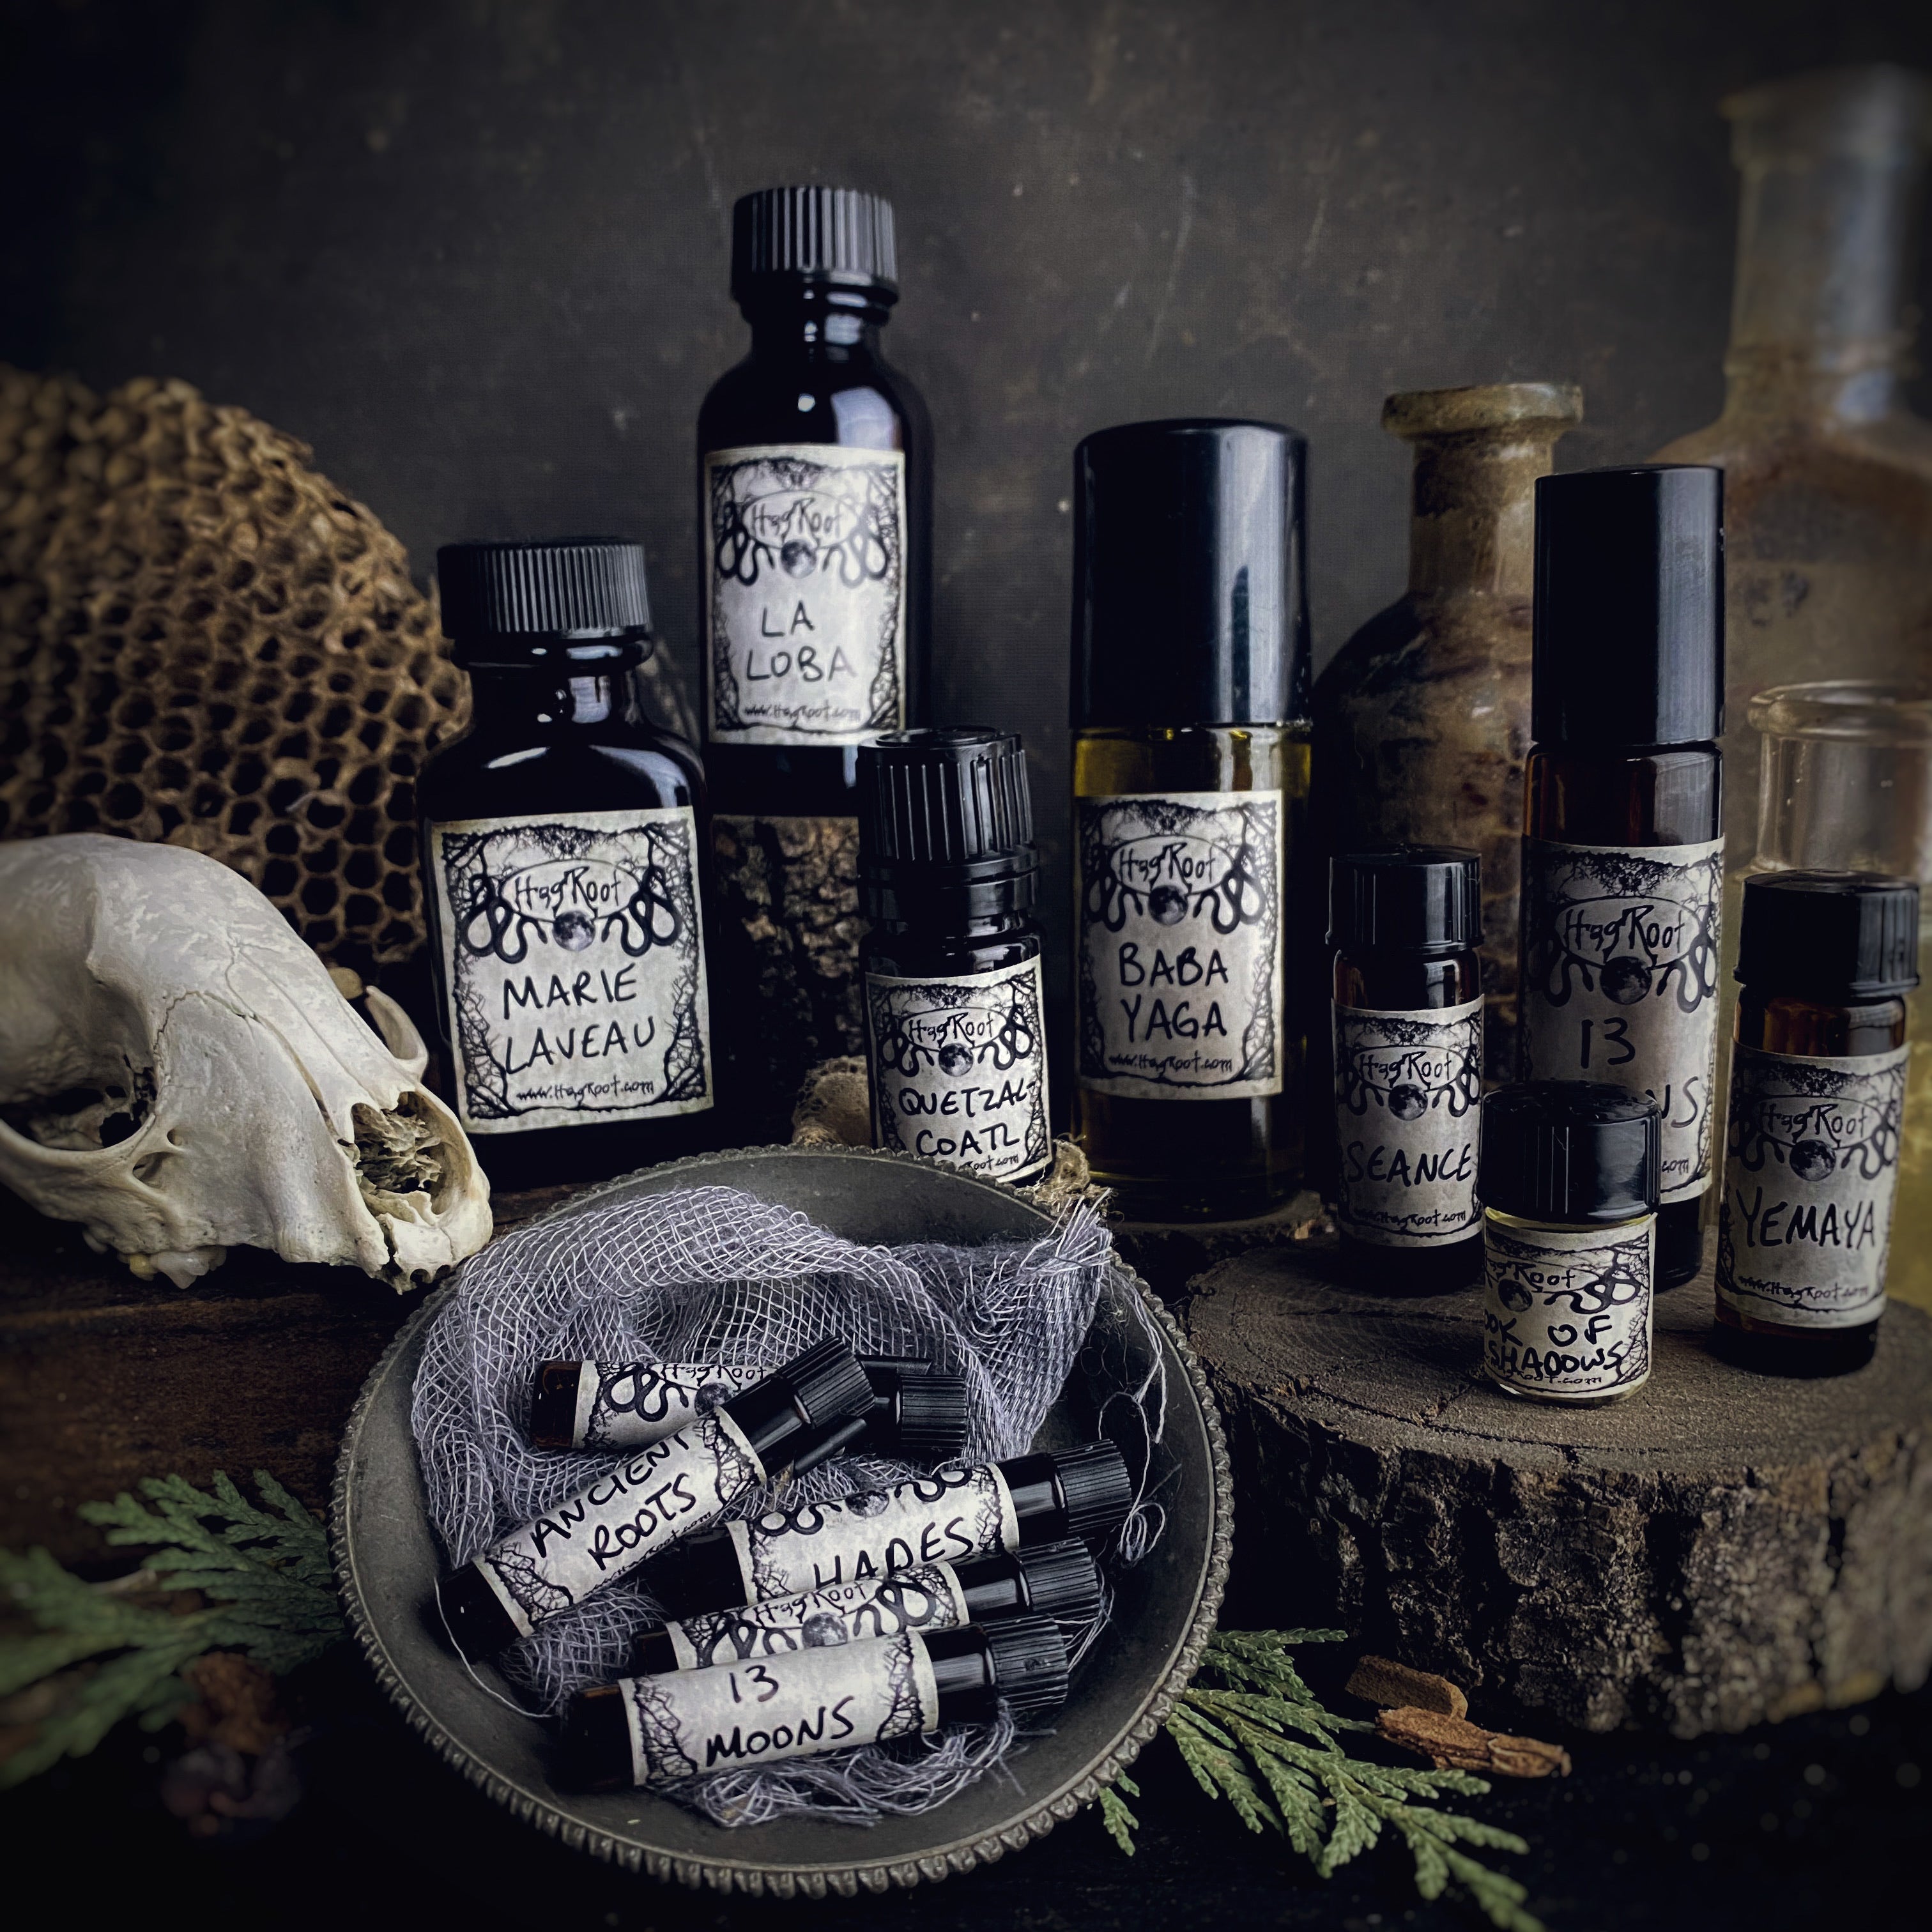 HAUNTED ORCHARD-(Apples, Peaches, Blackberries, Cinnamon, Charred Wood)-Perfume, Cologne, Anointing, Ritual Oil